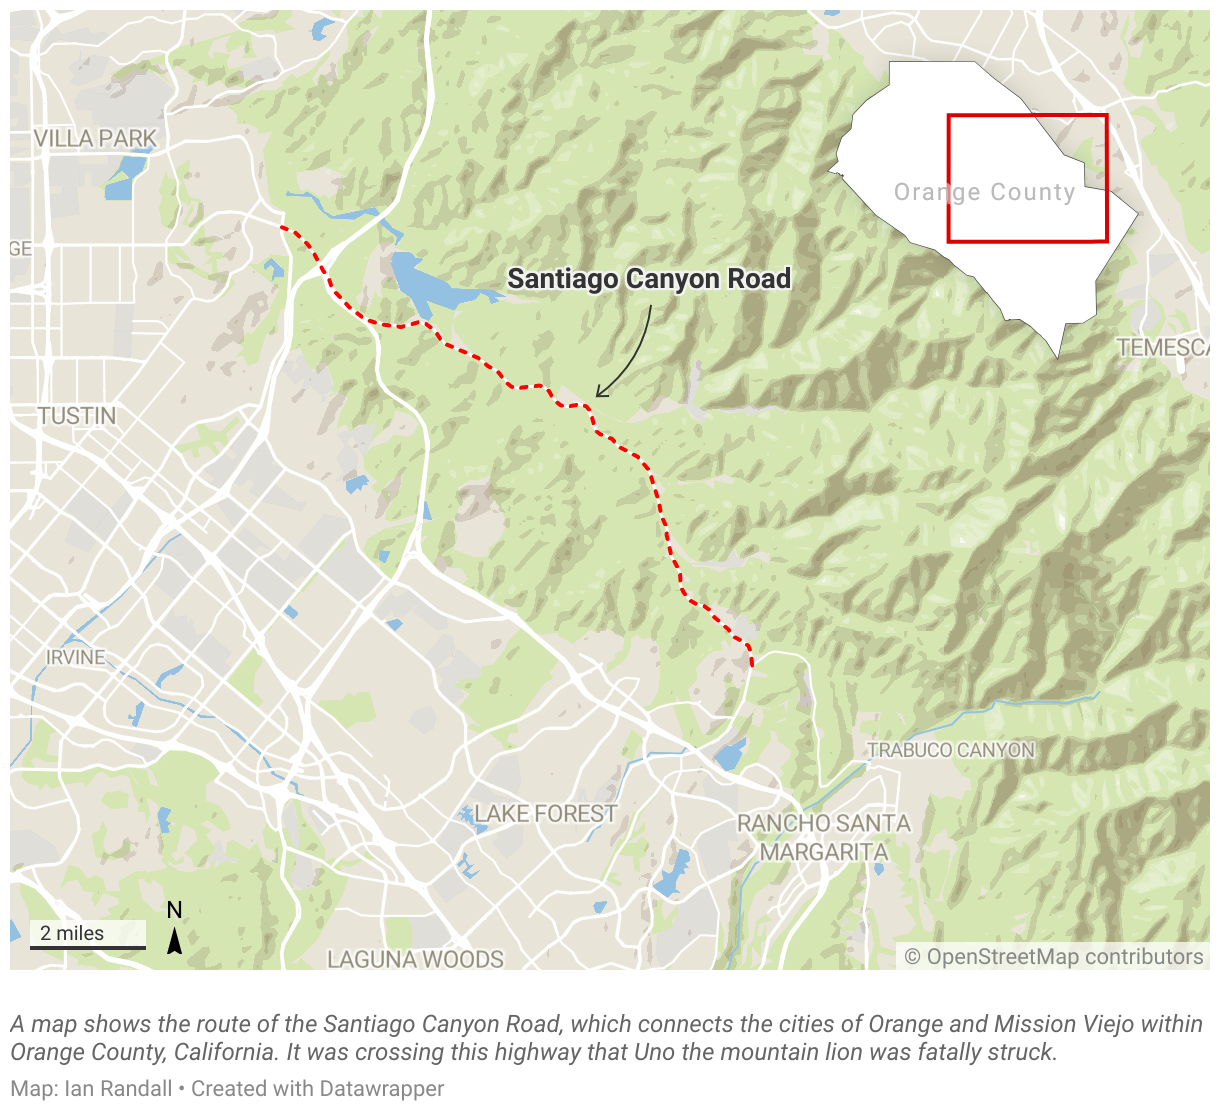 A map shows the route of the Santiago Canyon Road, which connects the cities of Orange and Mission Viejo within Orange County, California.